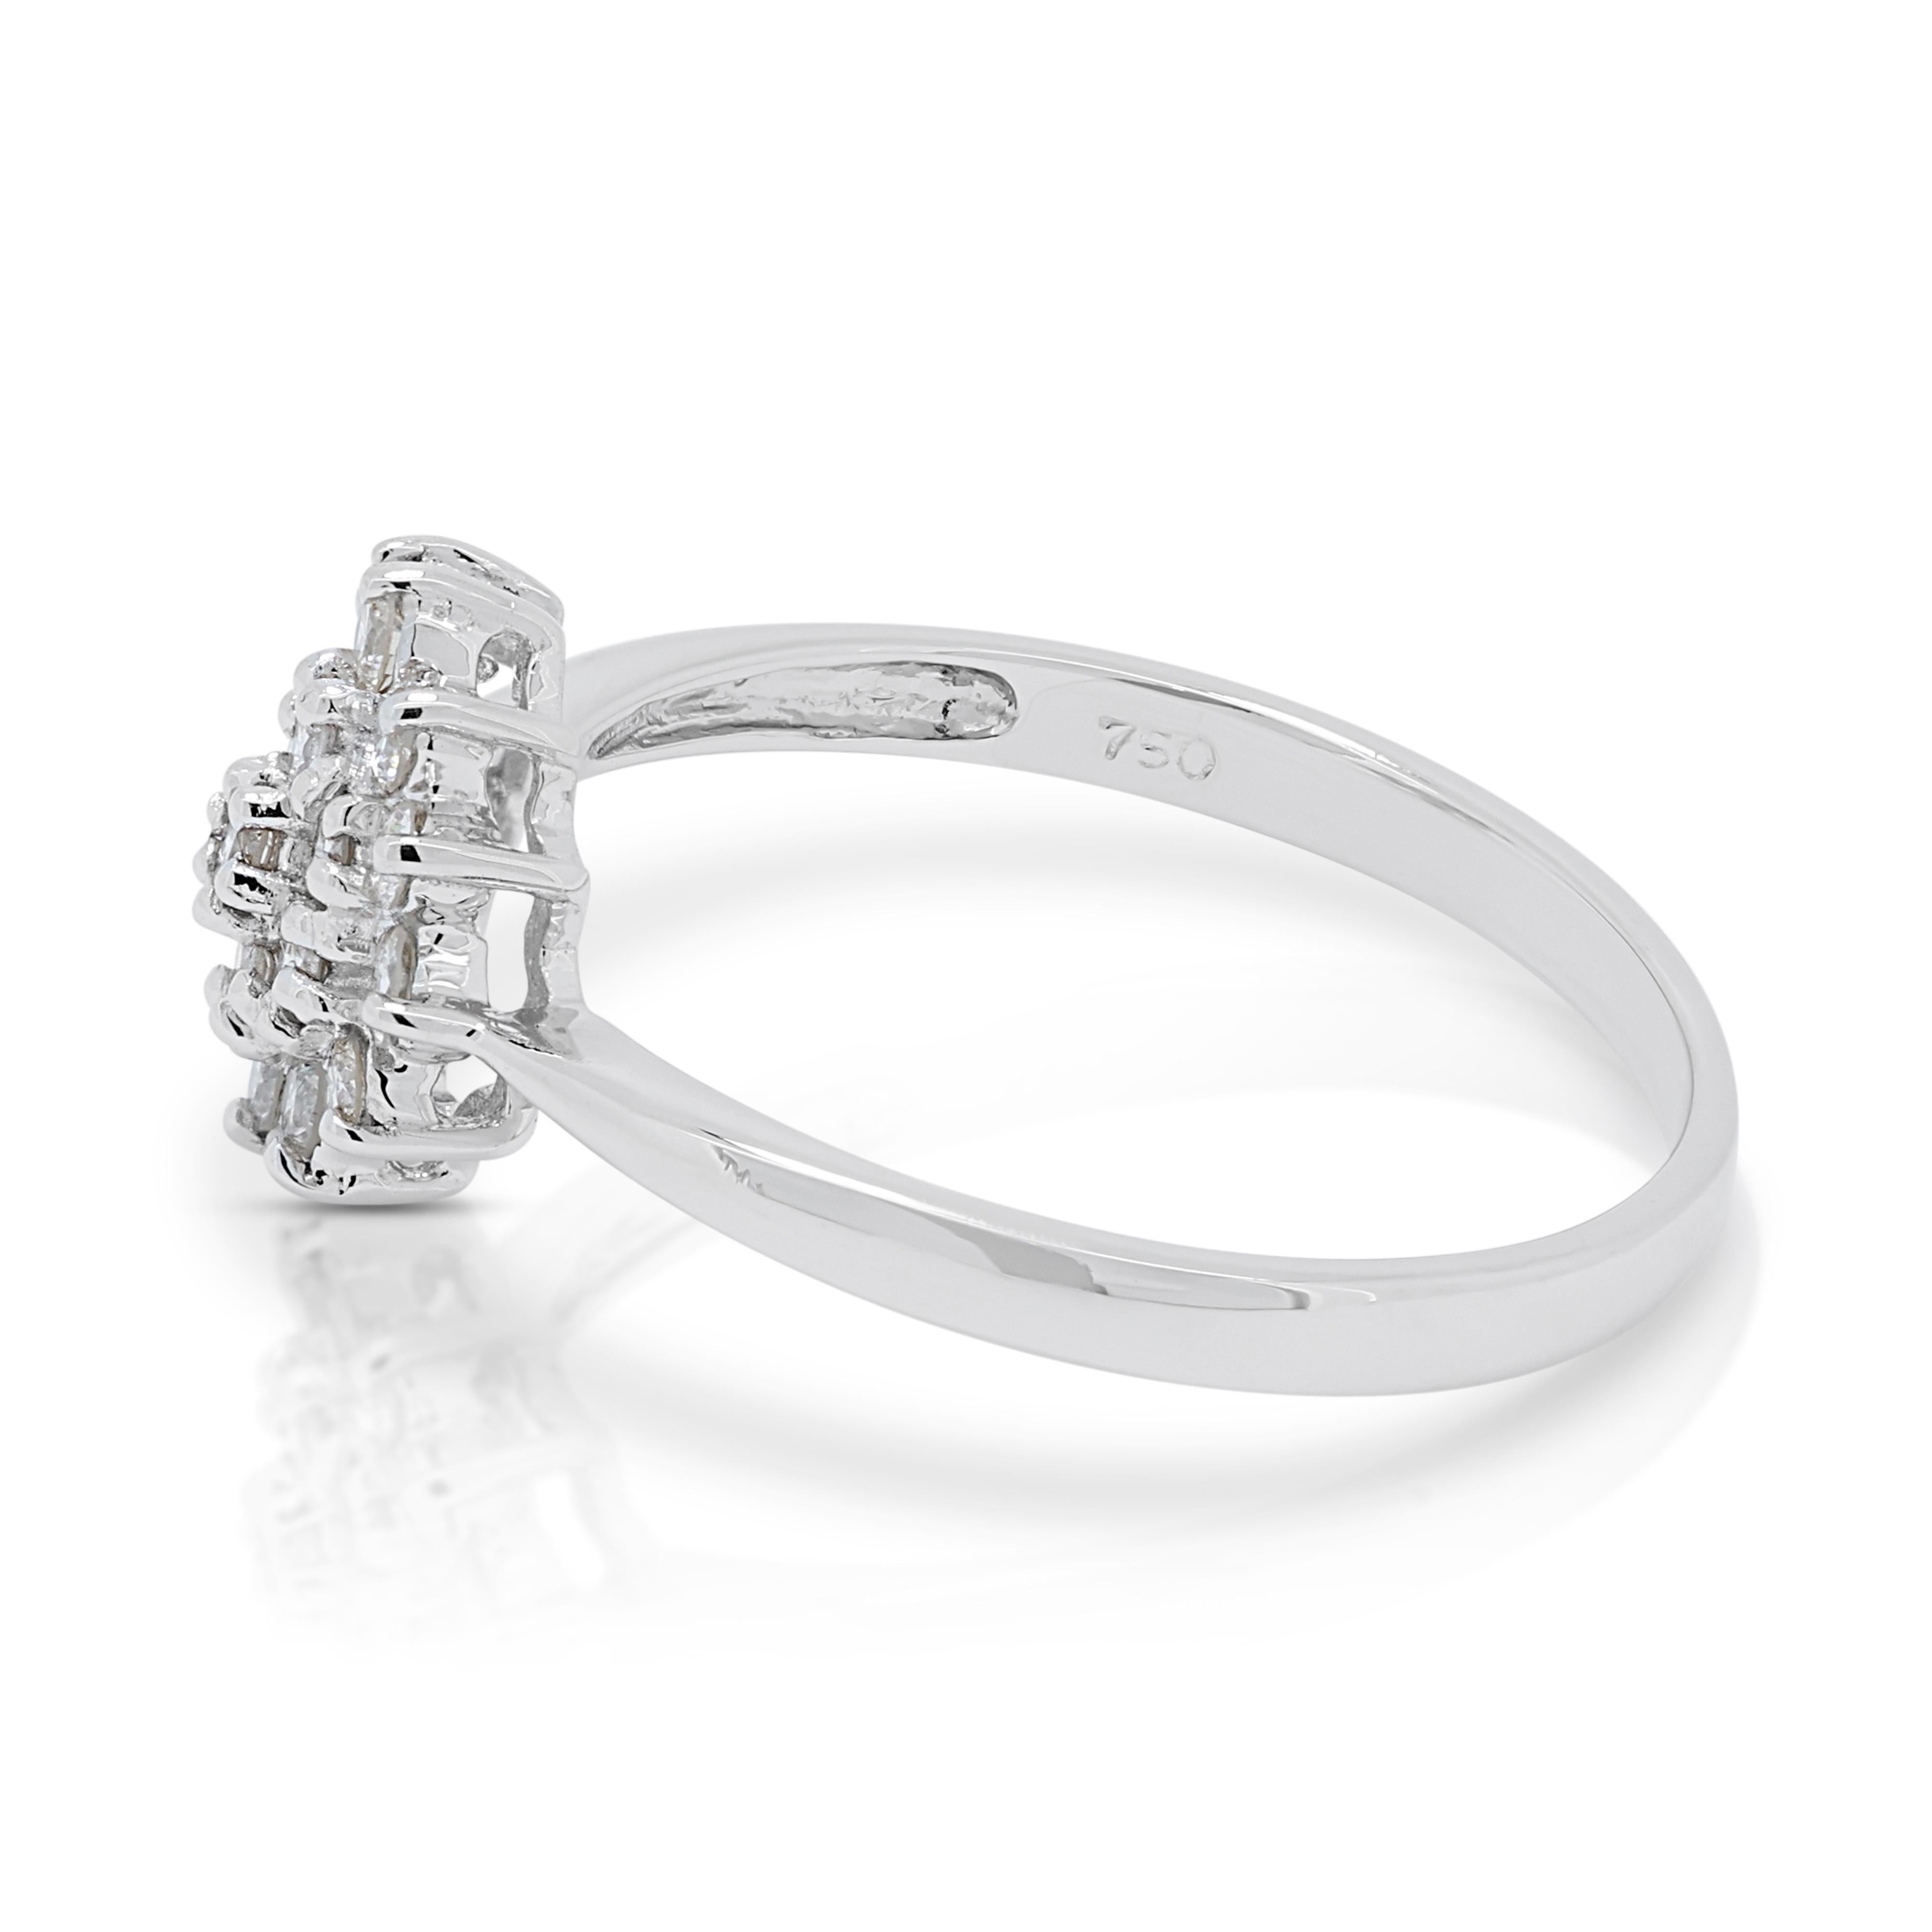 Captivating 0.4ct Diamond Stud Ring in 18K White Gold For Sale 1